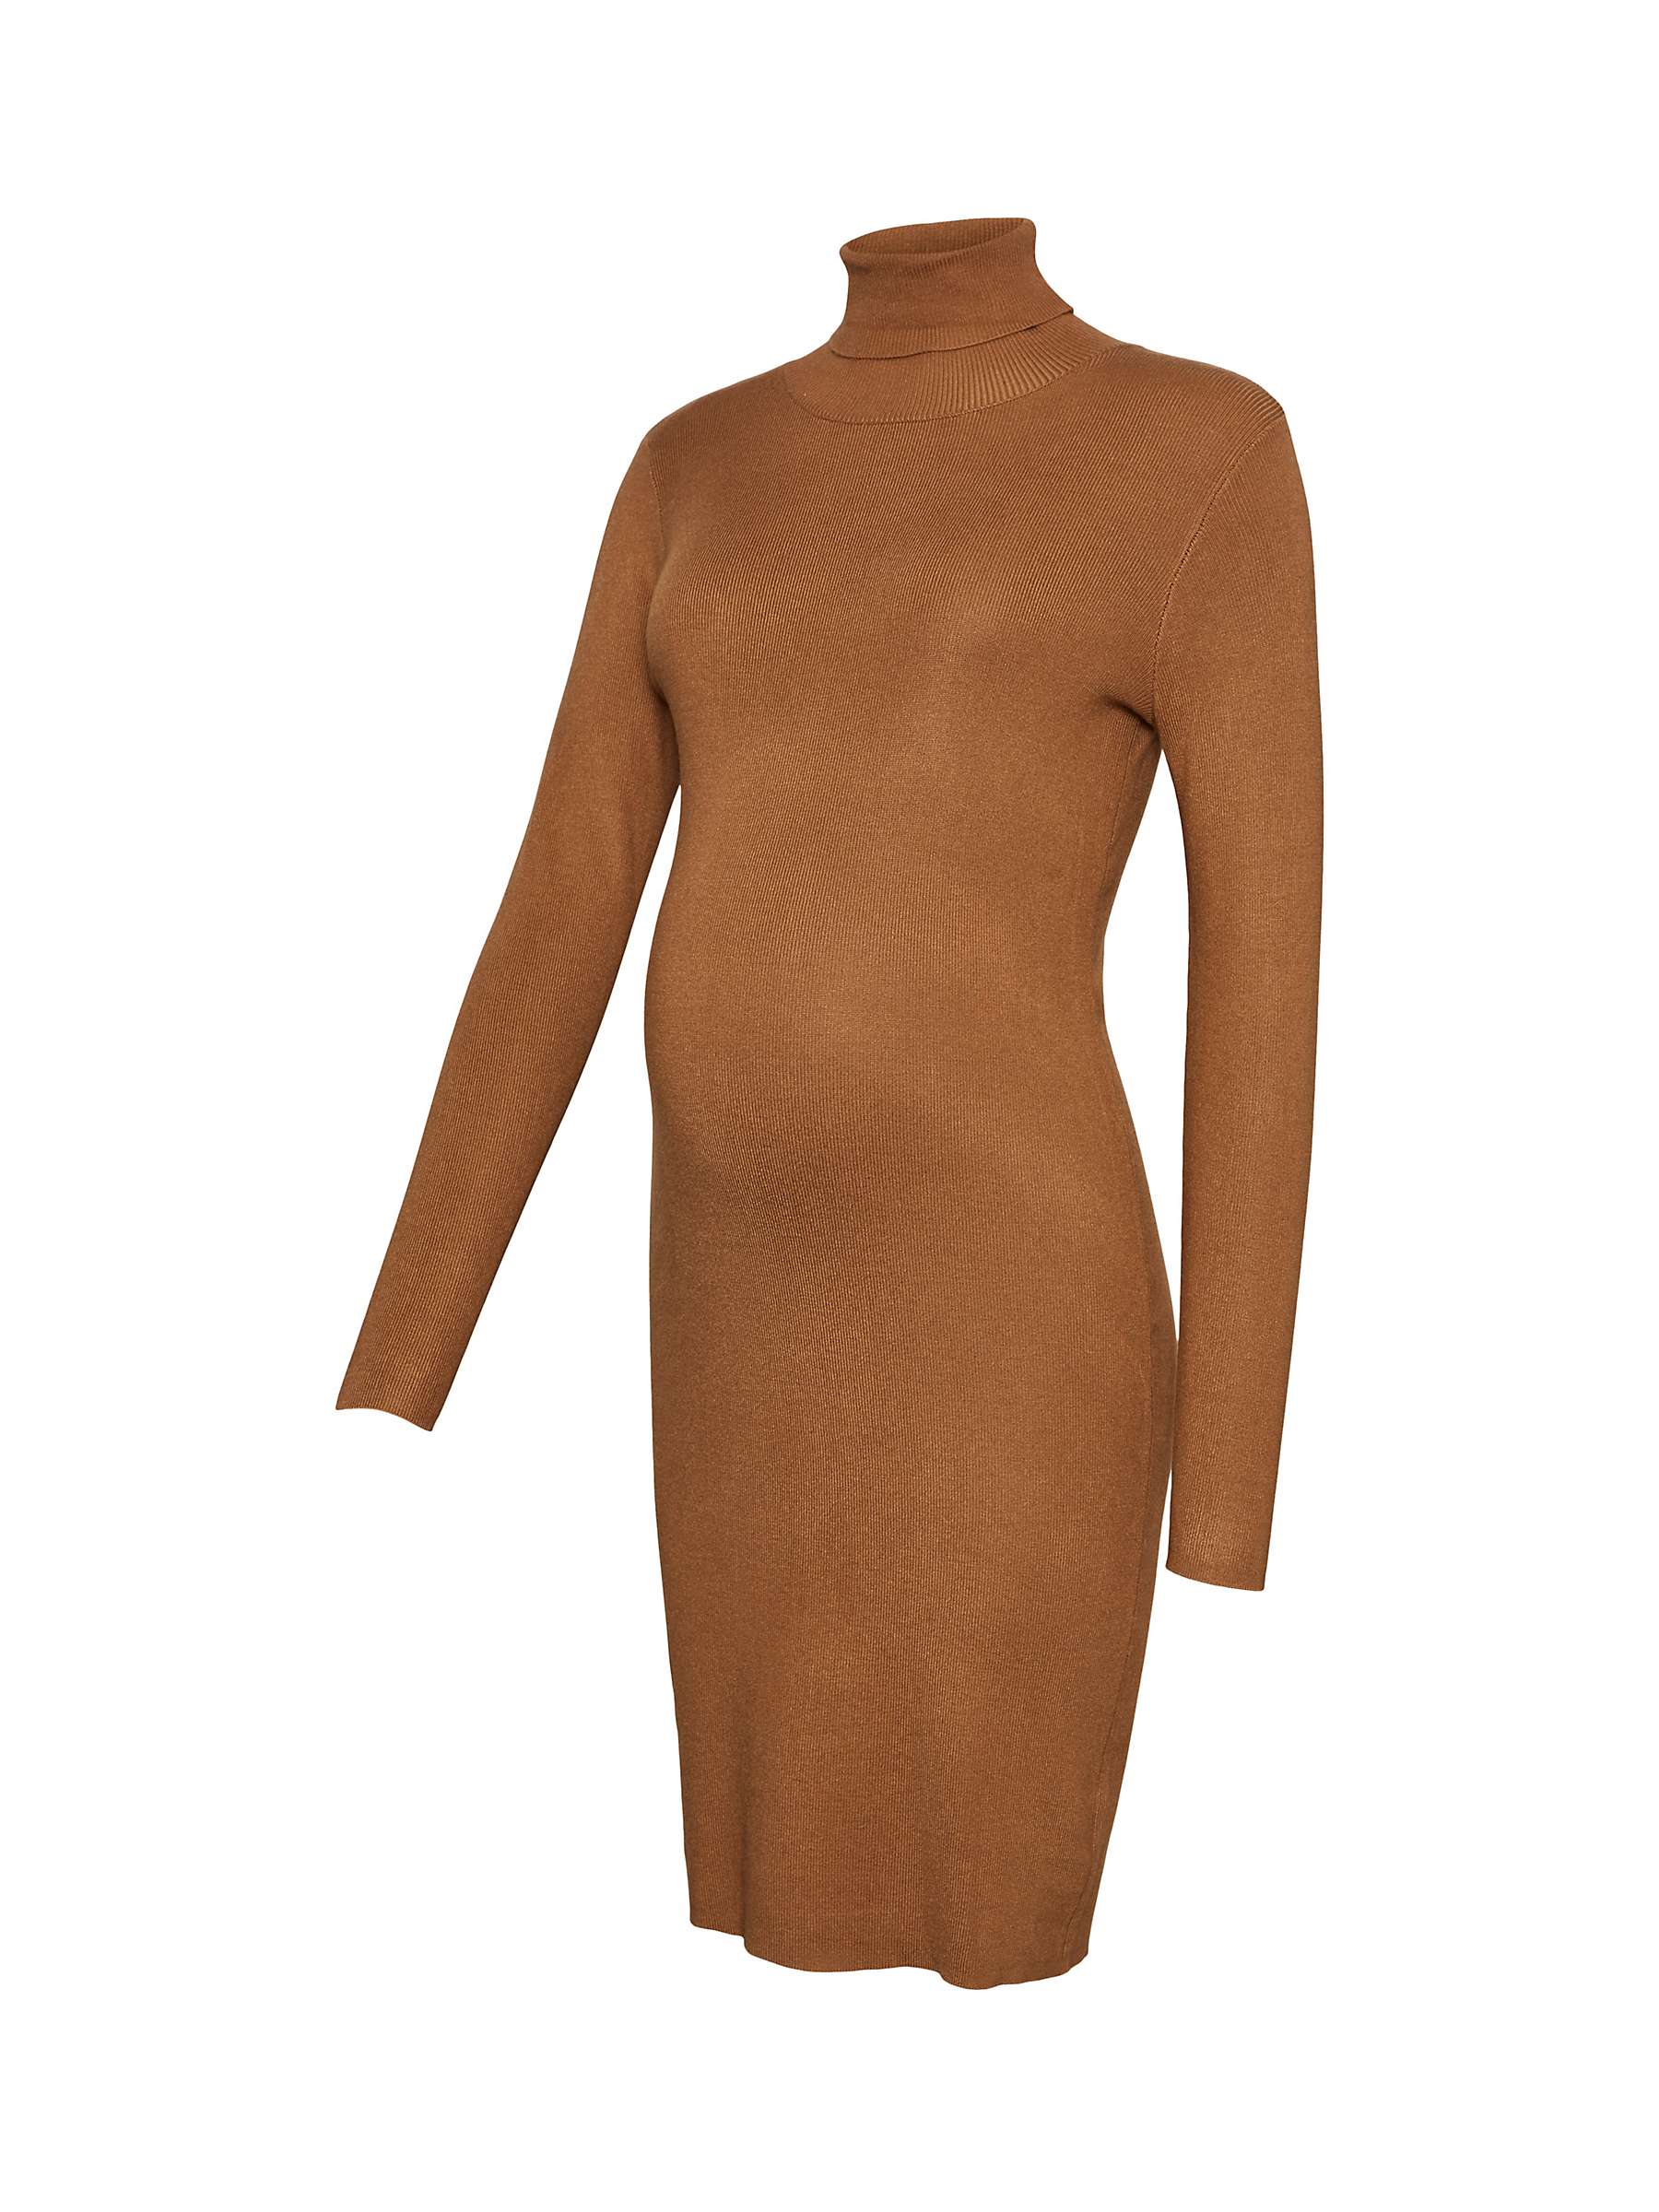 Buy Mamalicious Jacina Knitted Rollneck Jumper Maternity Dress Online at johnlewis.com